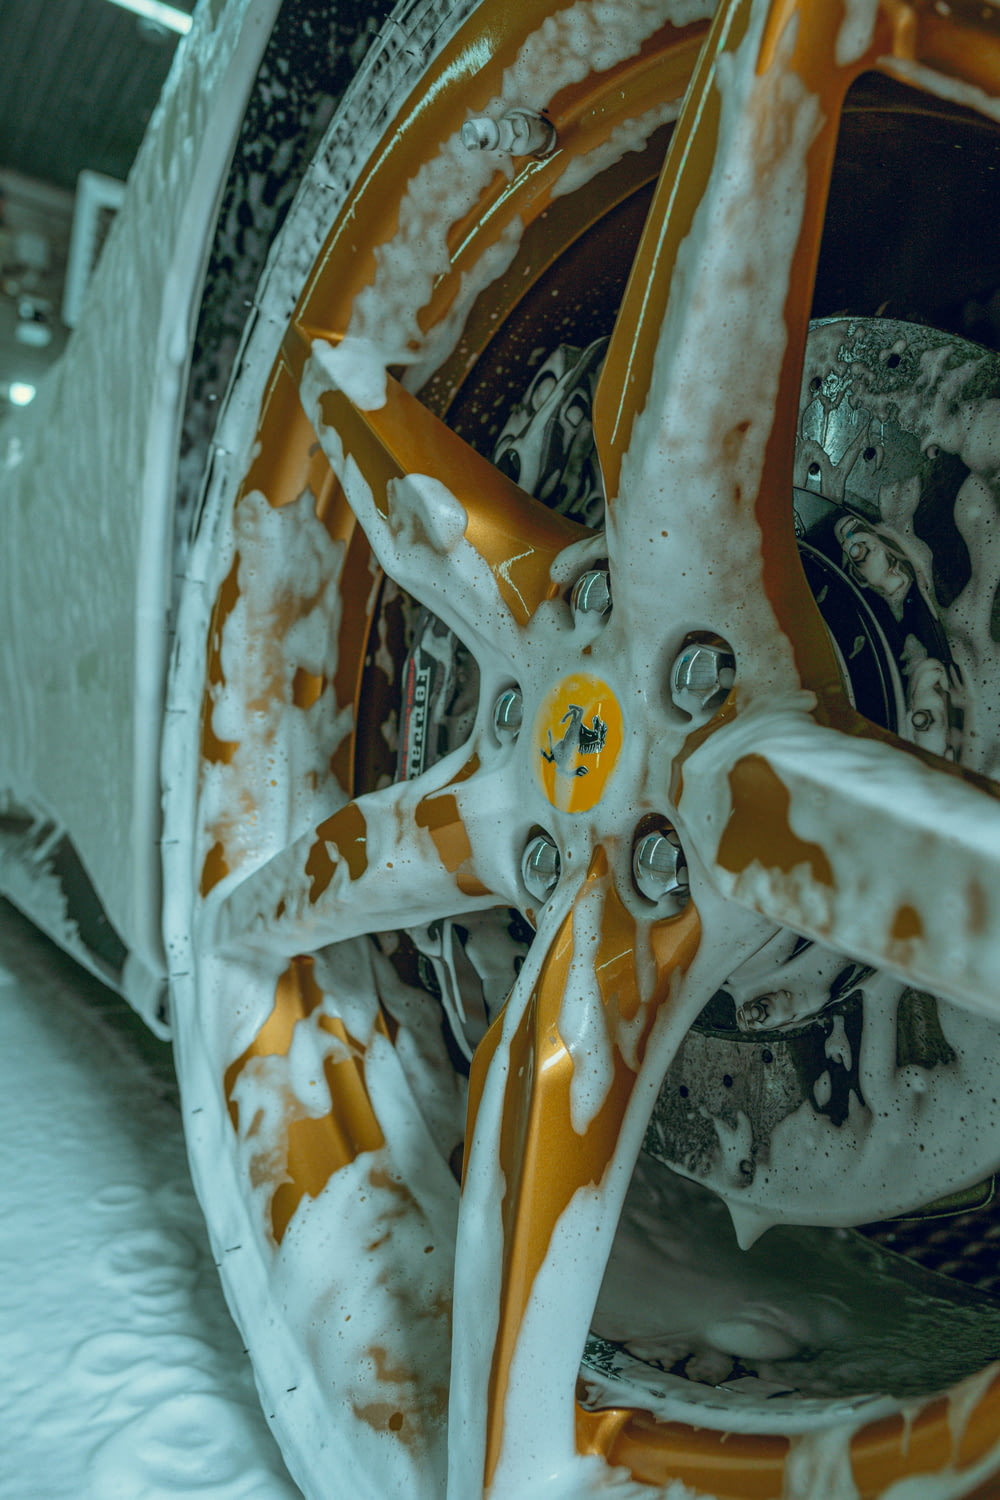 a close up of a snow covered car wheel